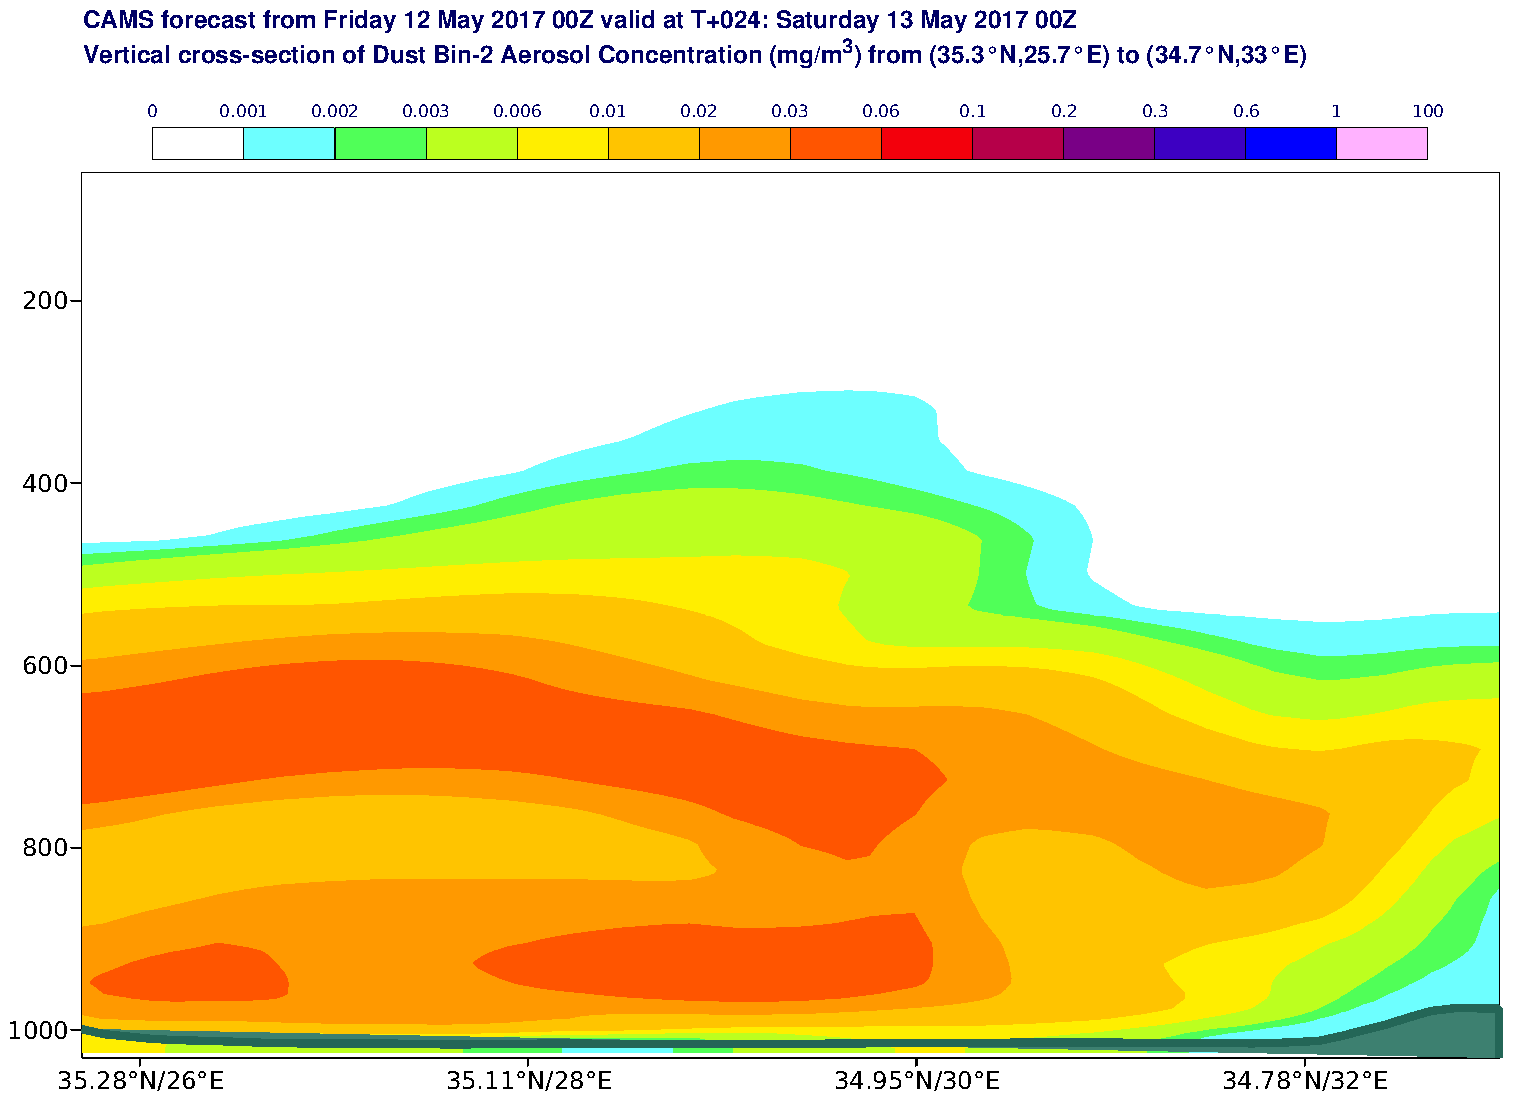 Vertical cross-section of Dust Bin-2 Aerosol Concentration (mg/m3) valid at T24 - 2017-05-13 00:00